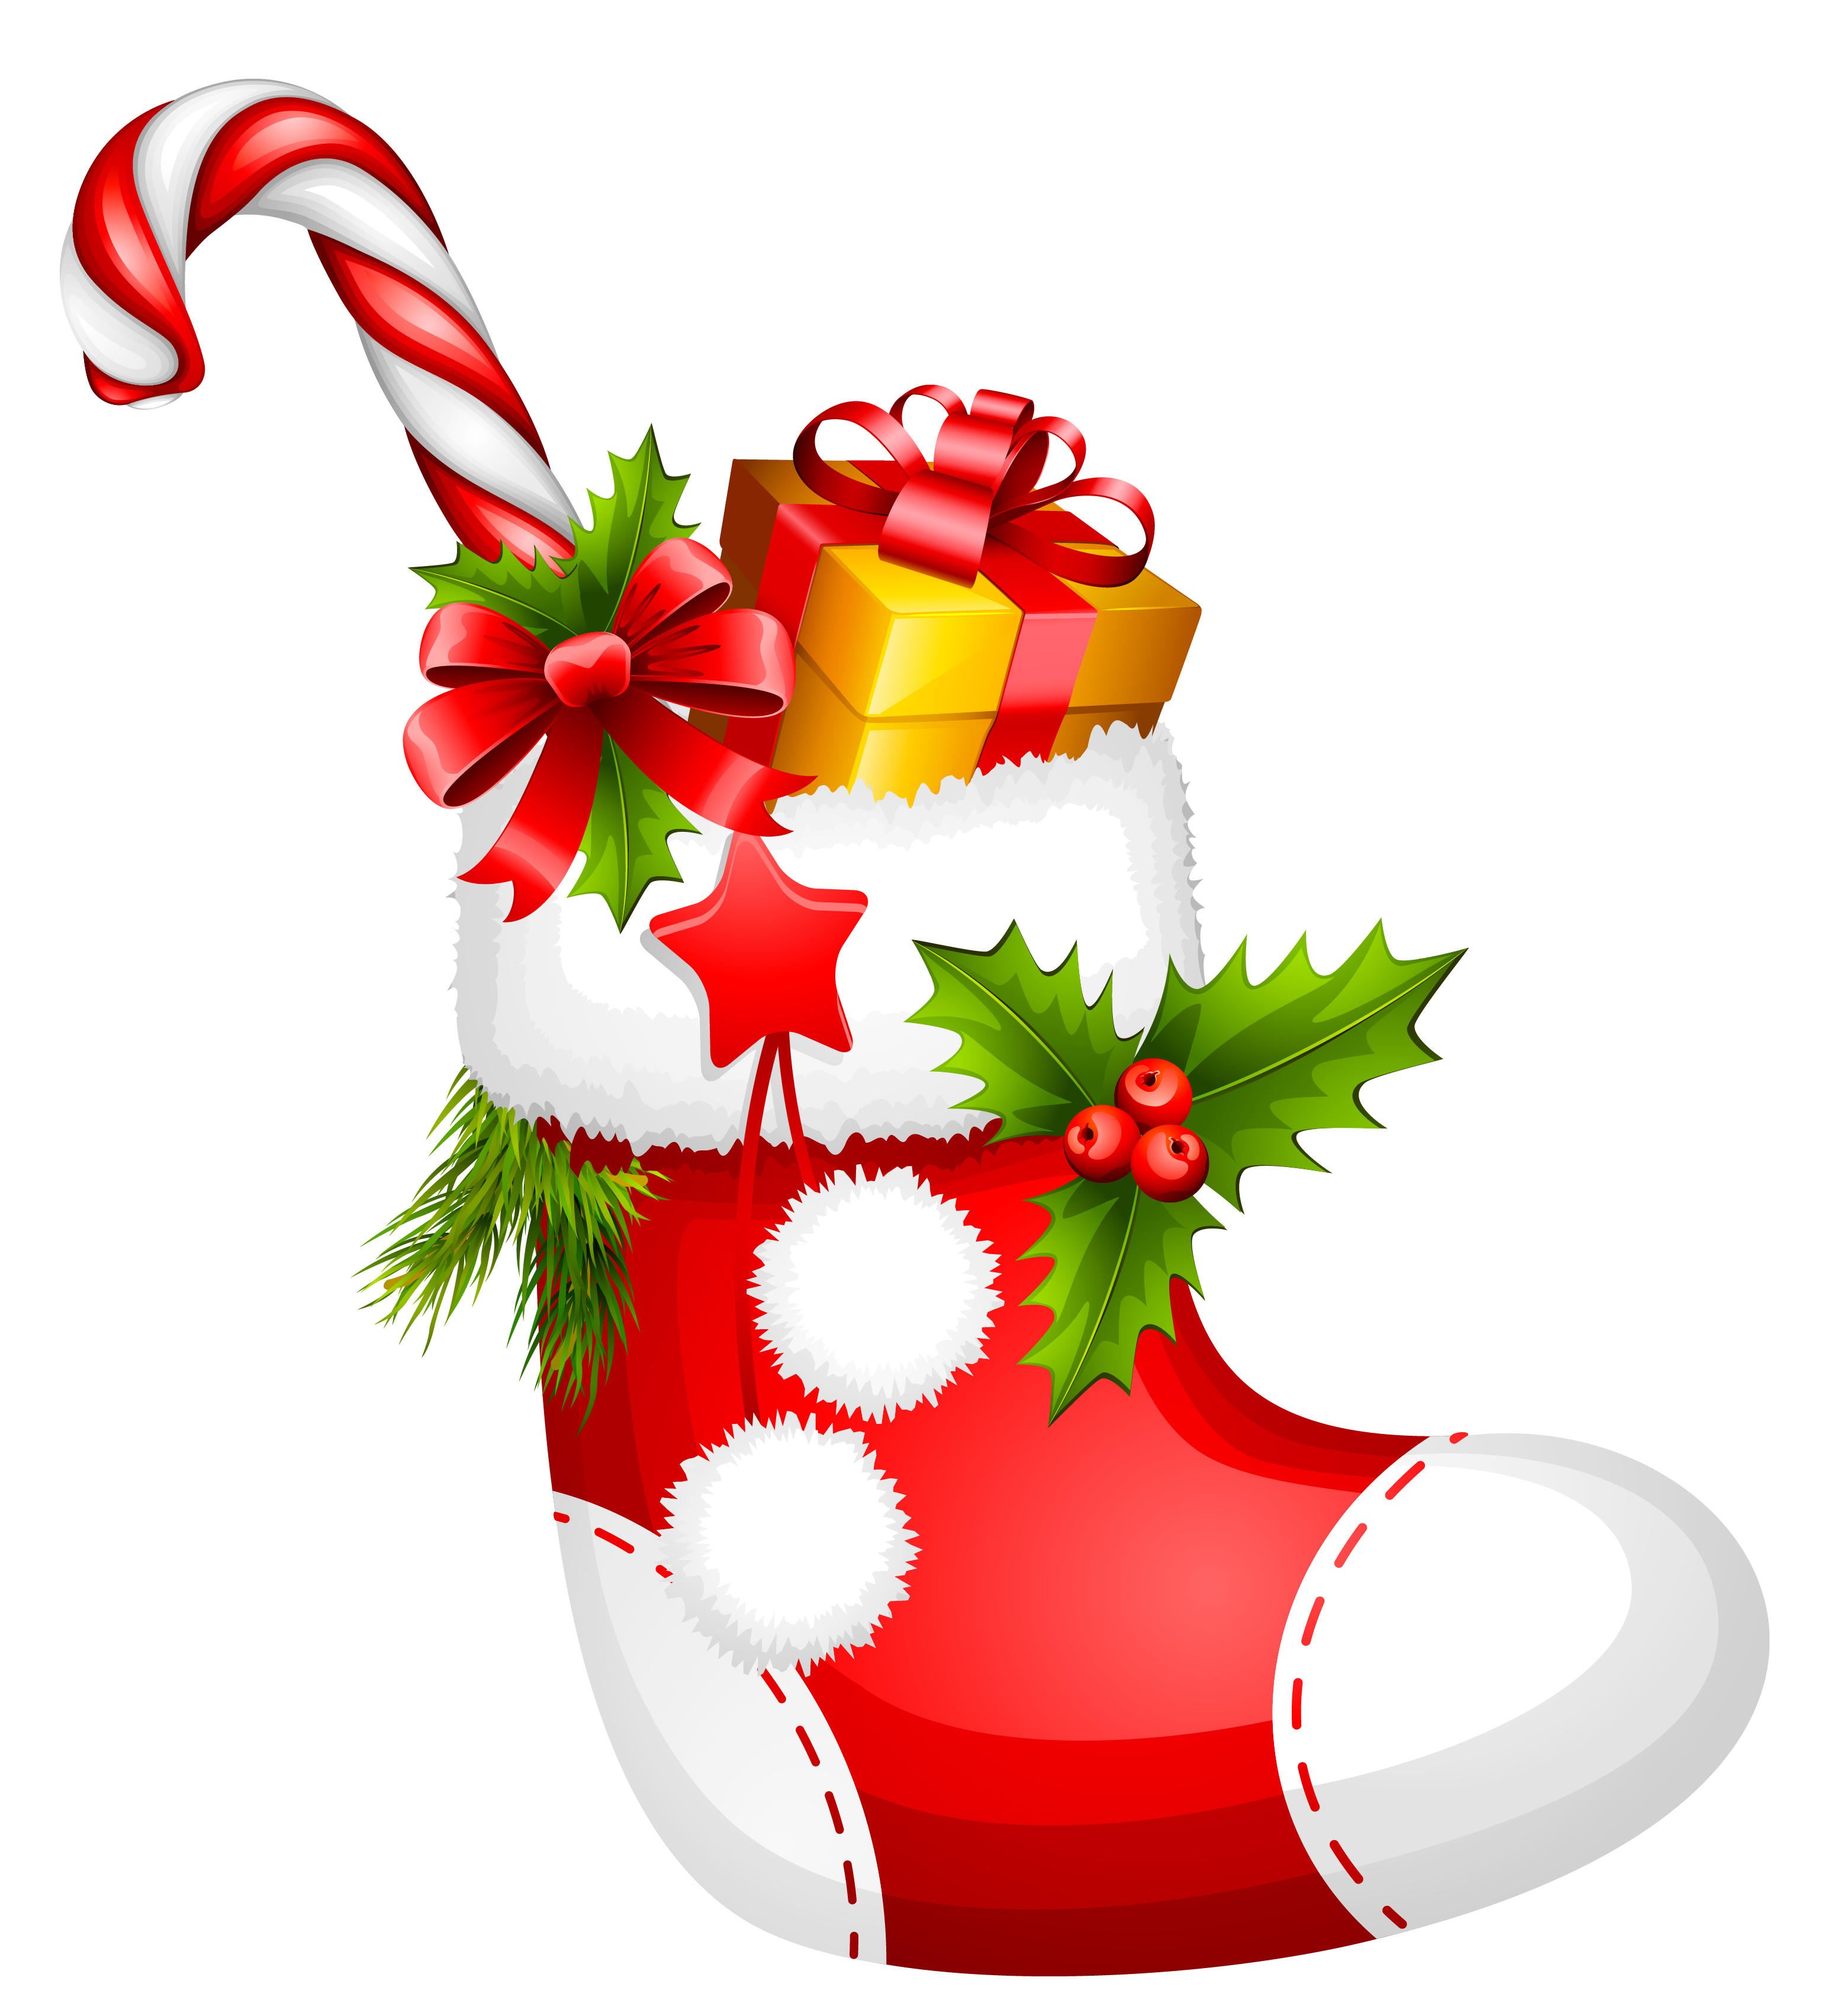 Christmas Stockings Clipart - Wallpapers, Pics, Pictures, Images ...